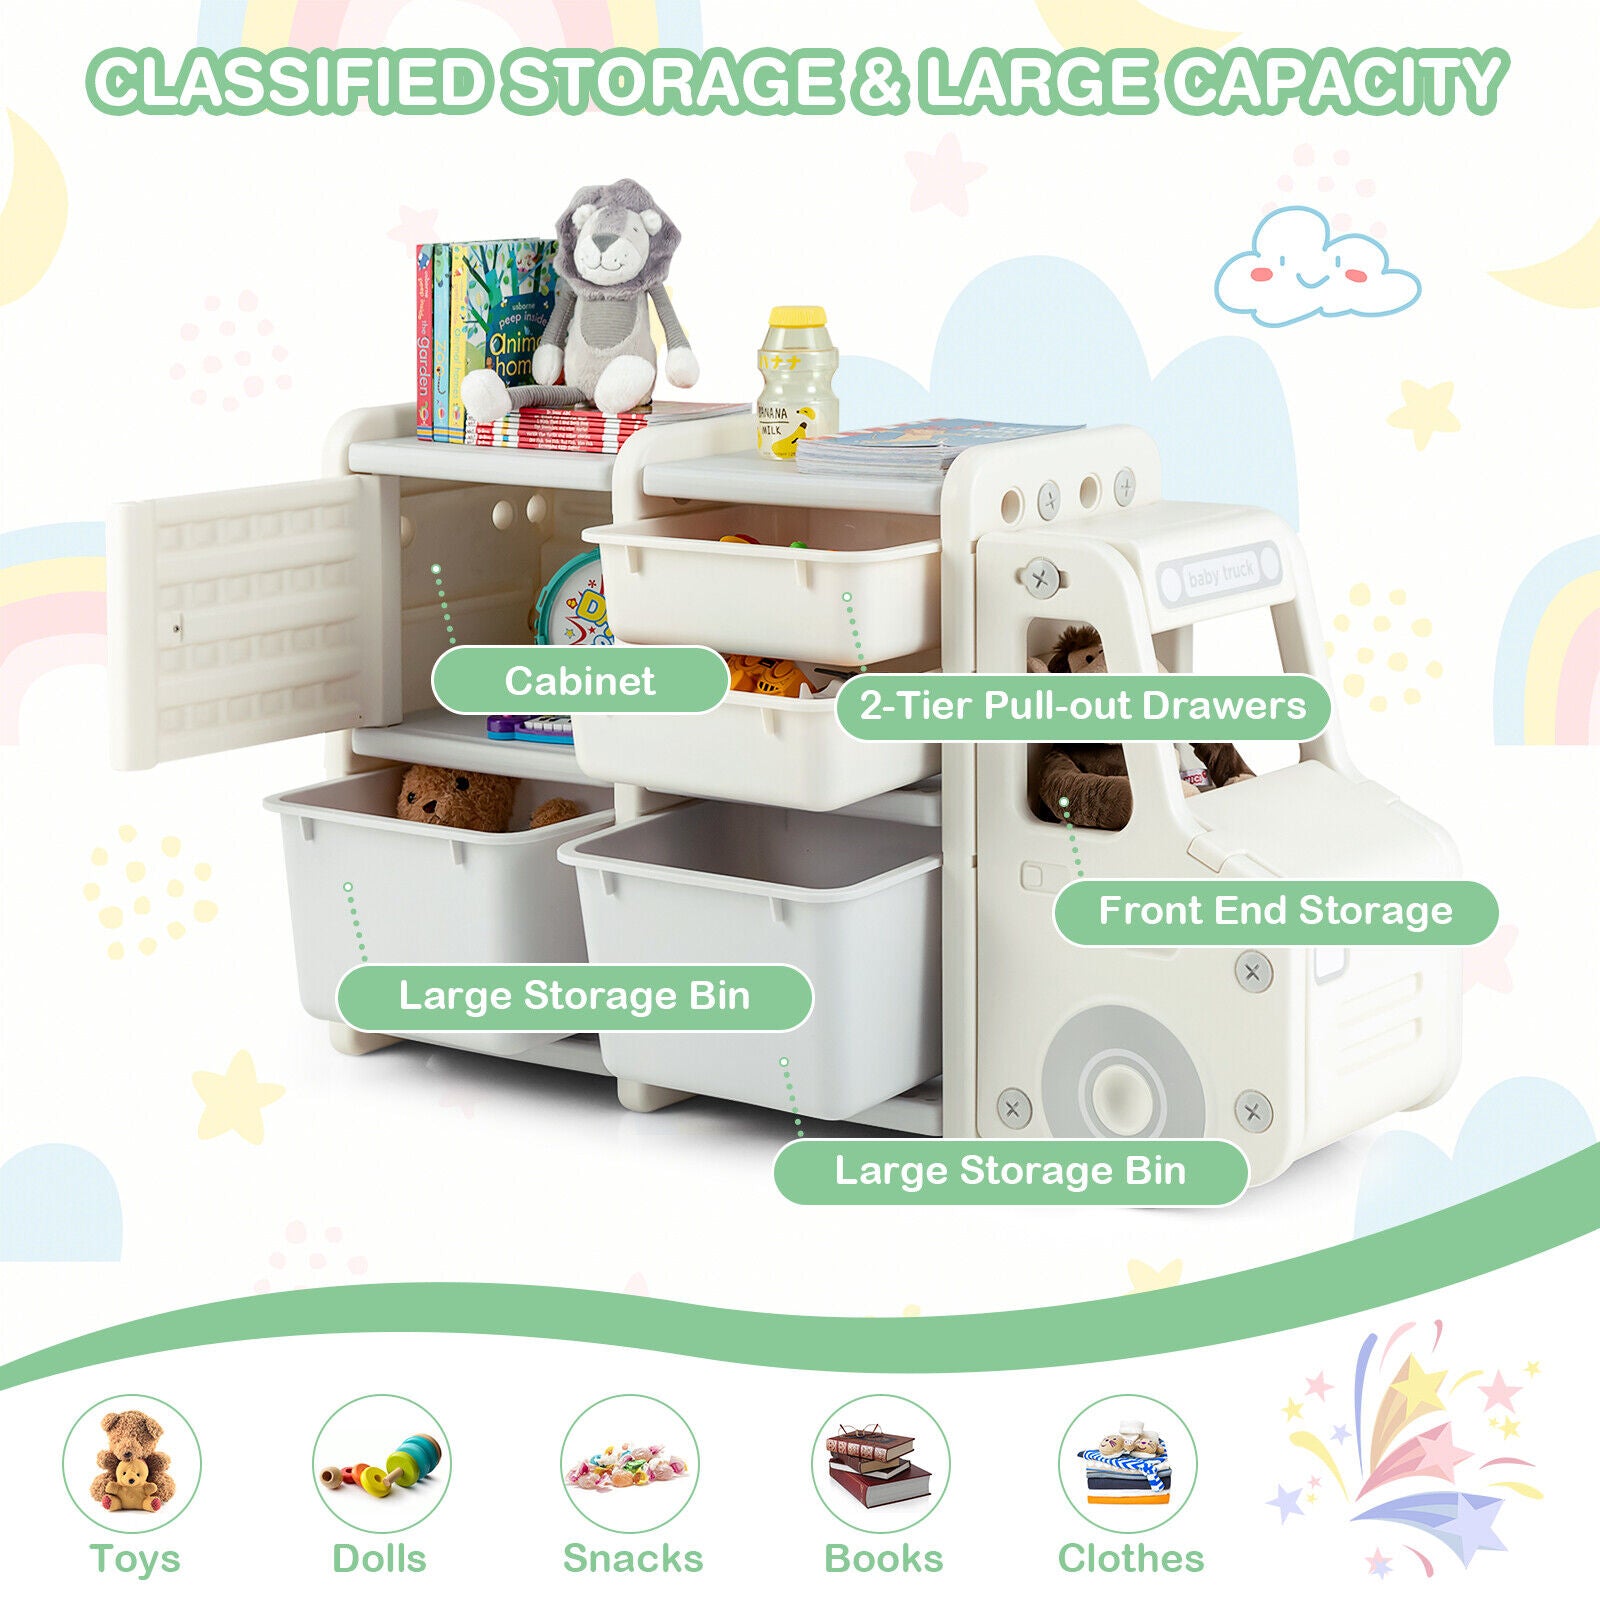 Spacious Storage Capacity: This charming toy storage organizer offers ample storage space with 2 large bins, 2 small drawers, a single-door cabinet, and a hollow front end. It can accommodate a wide range of kids' toys, dolls, snacks, books, and clothes. The hollow front end is equipped with a detachable cover, making it easy to store and access items.